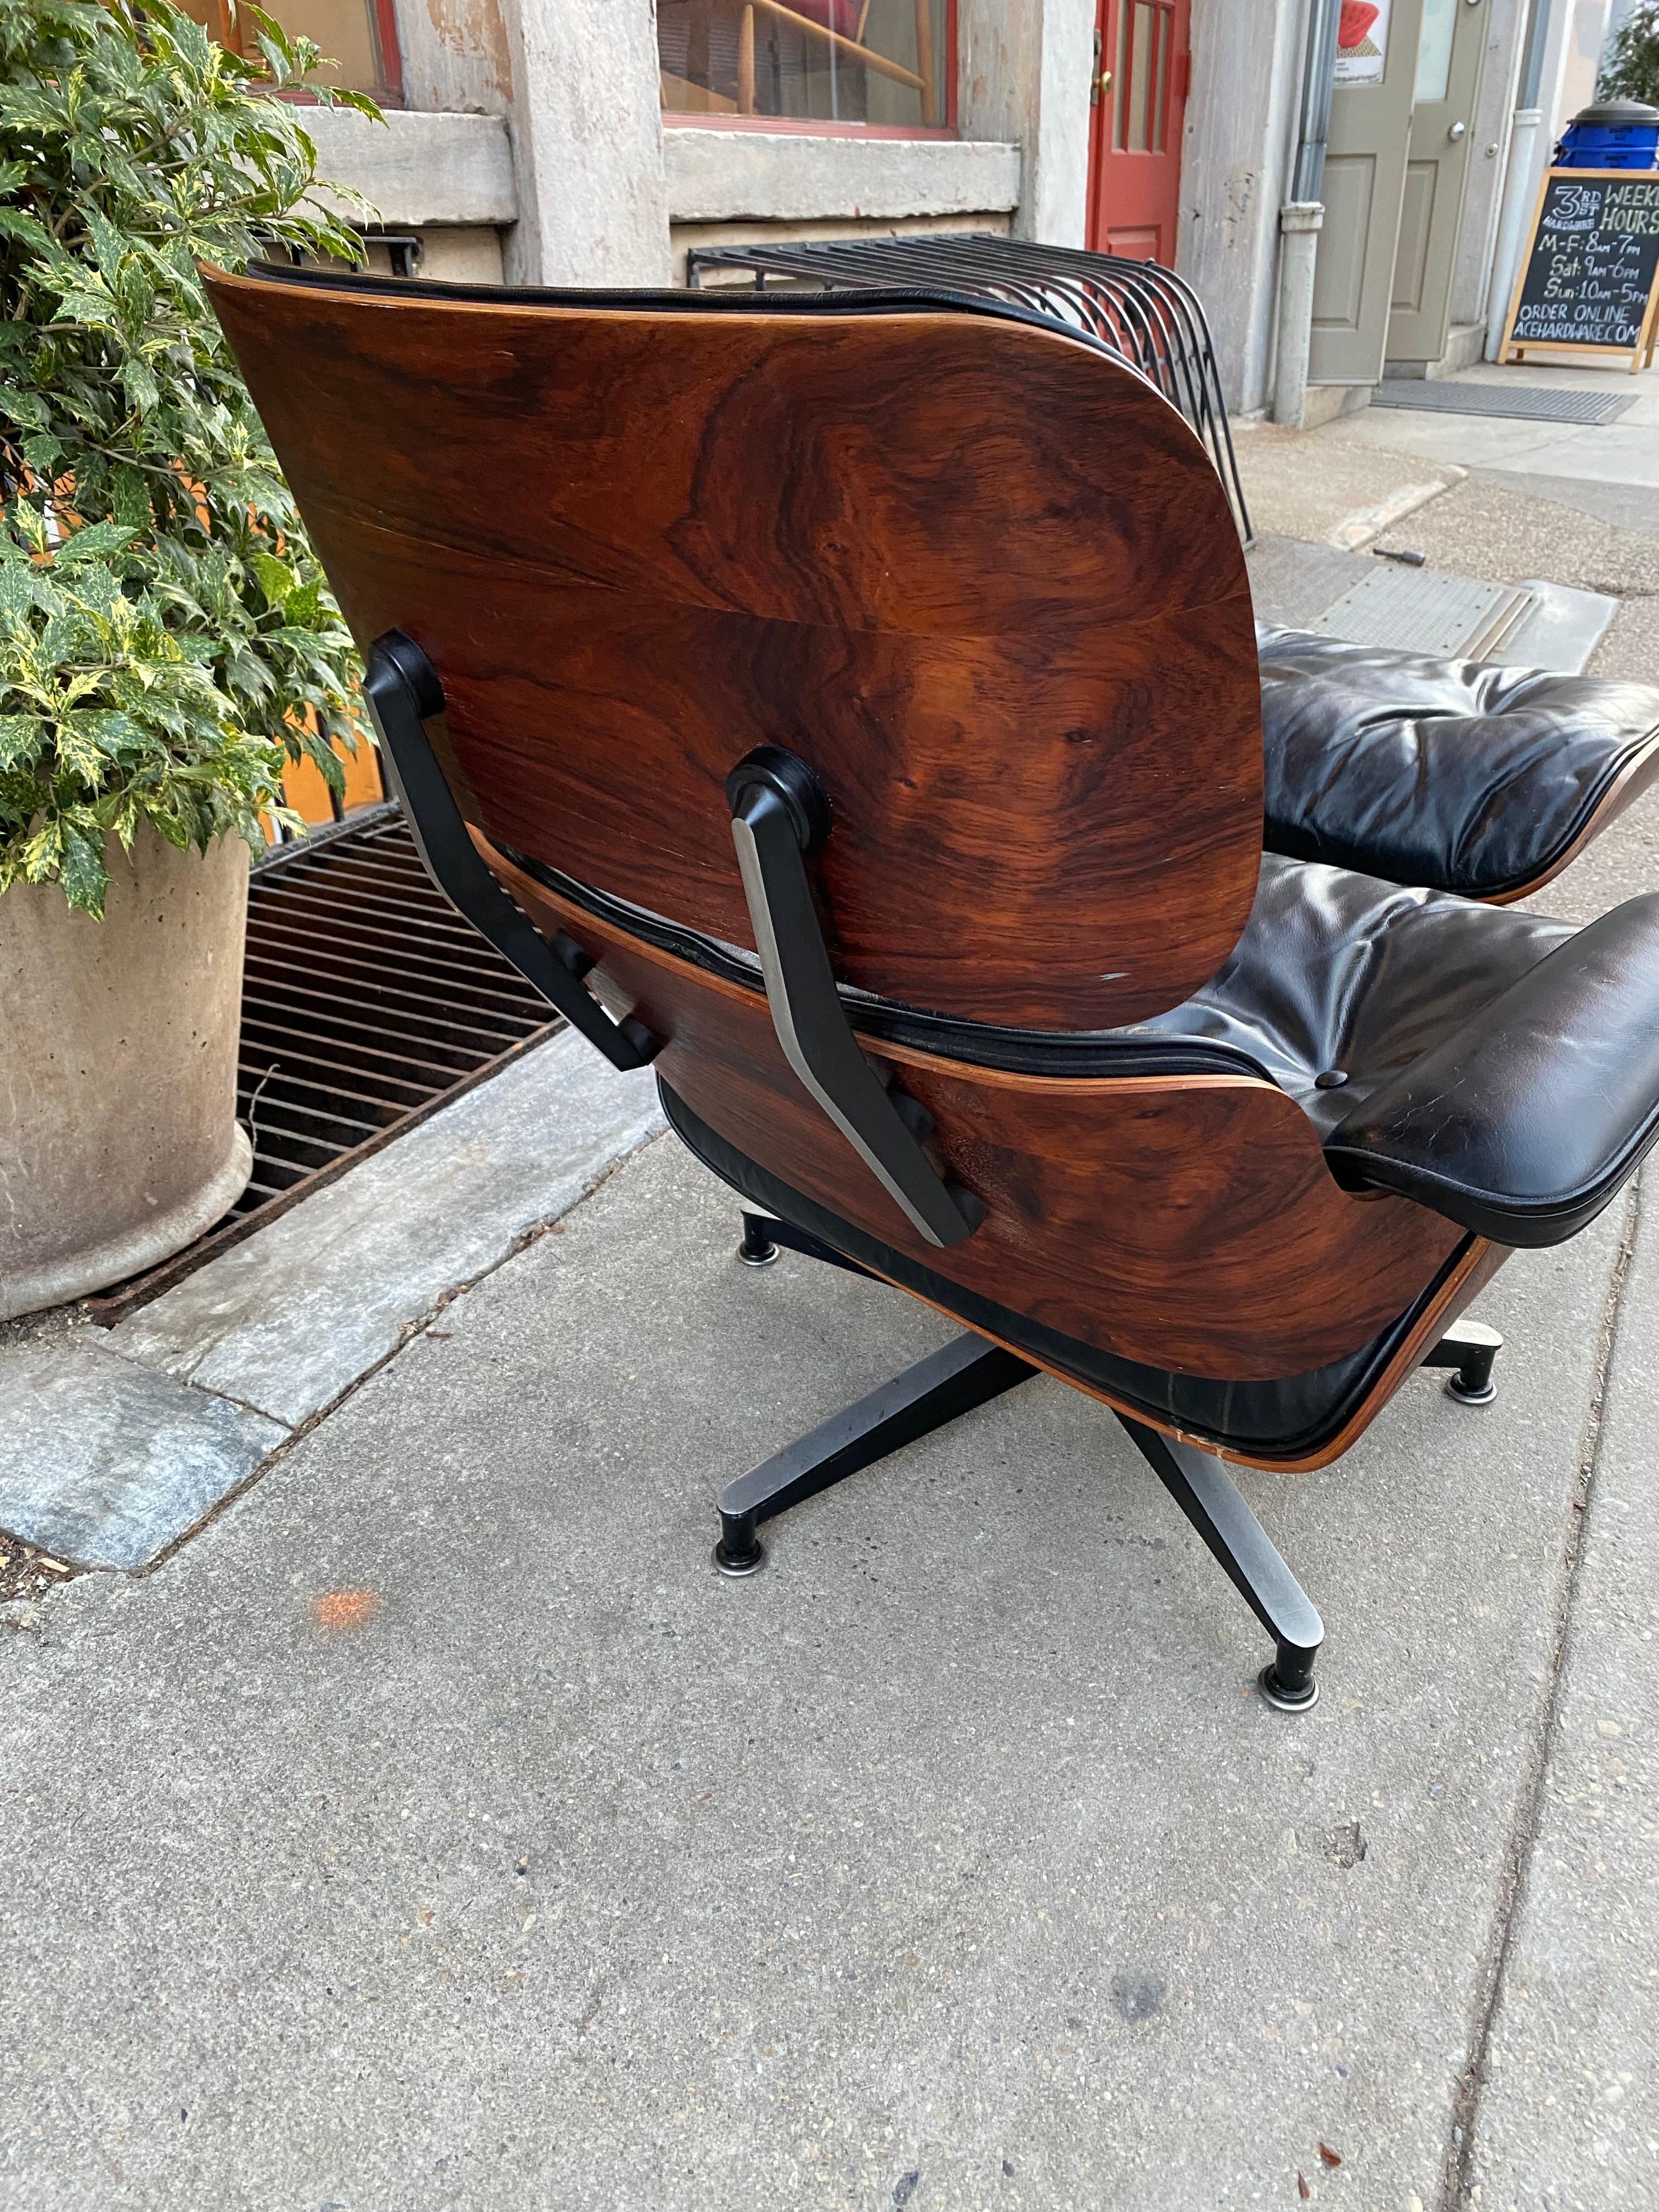 Charles and Ray Eames 670 Rosewood Lounge Chair and Ottoman.  Black leather with down filled cushions.  Wood grain on this example is really nice!  Probably one of the nicest models of this chair I have had in years!  Leather is in great condition